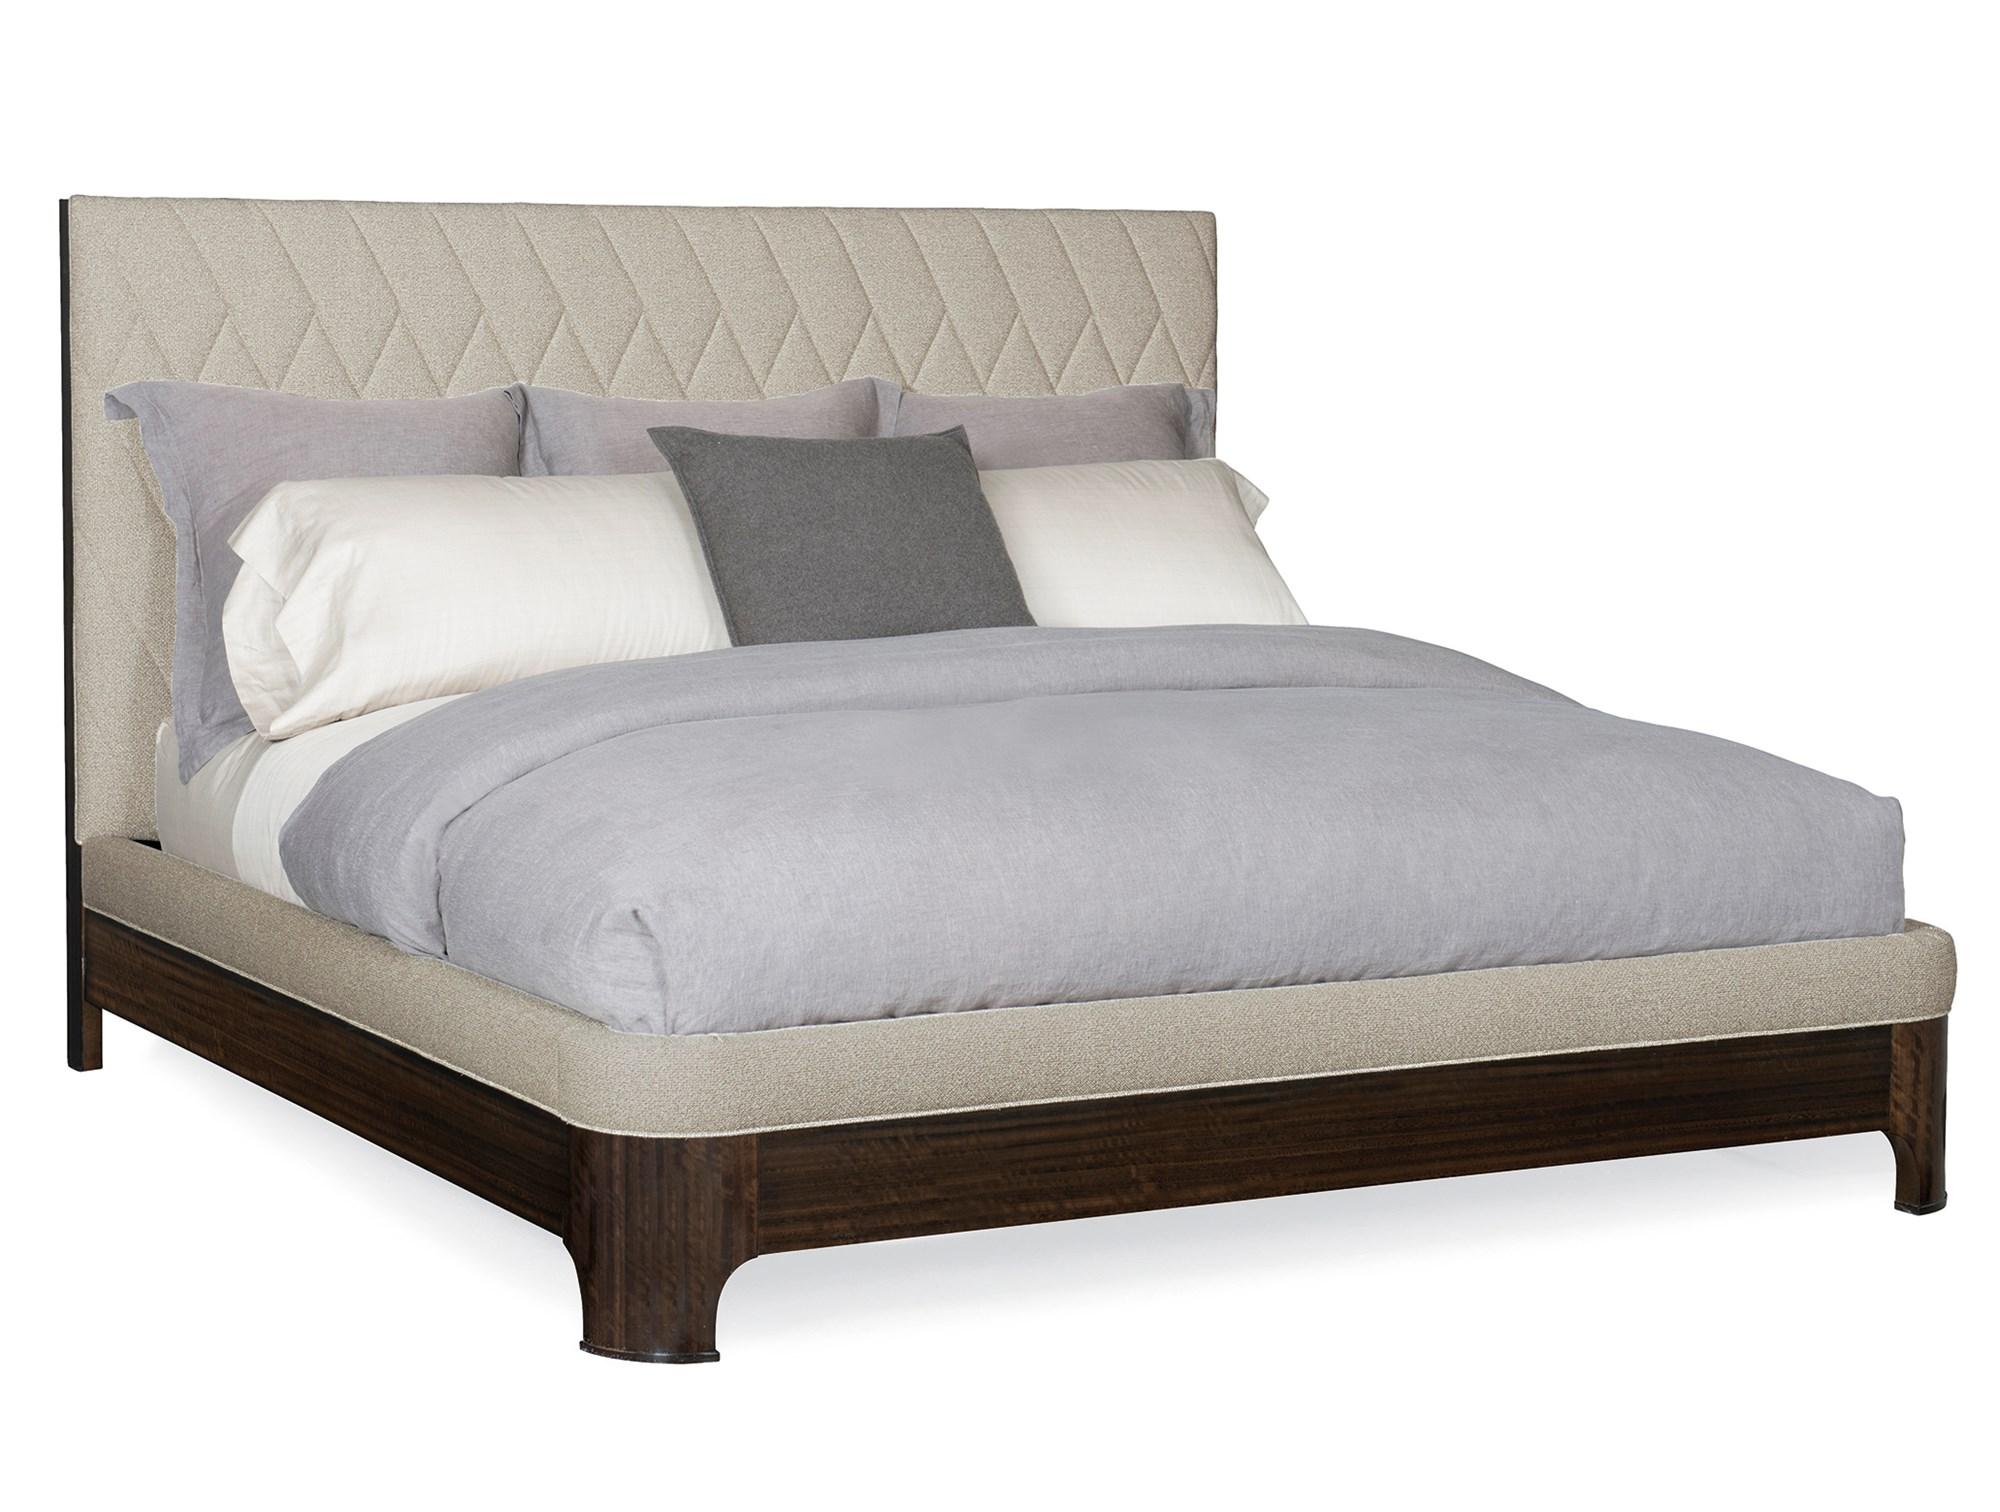 Contemporary Platform Bed MODERNE BED M023-417-101 in Neutral Fabric